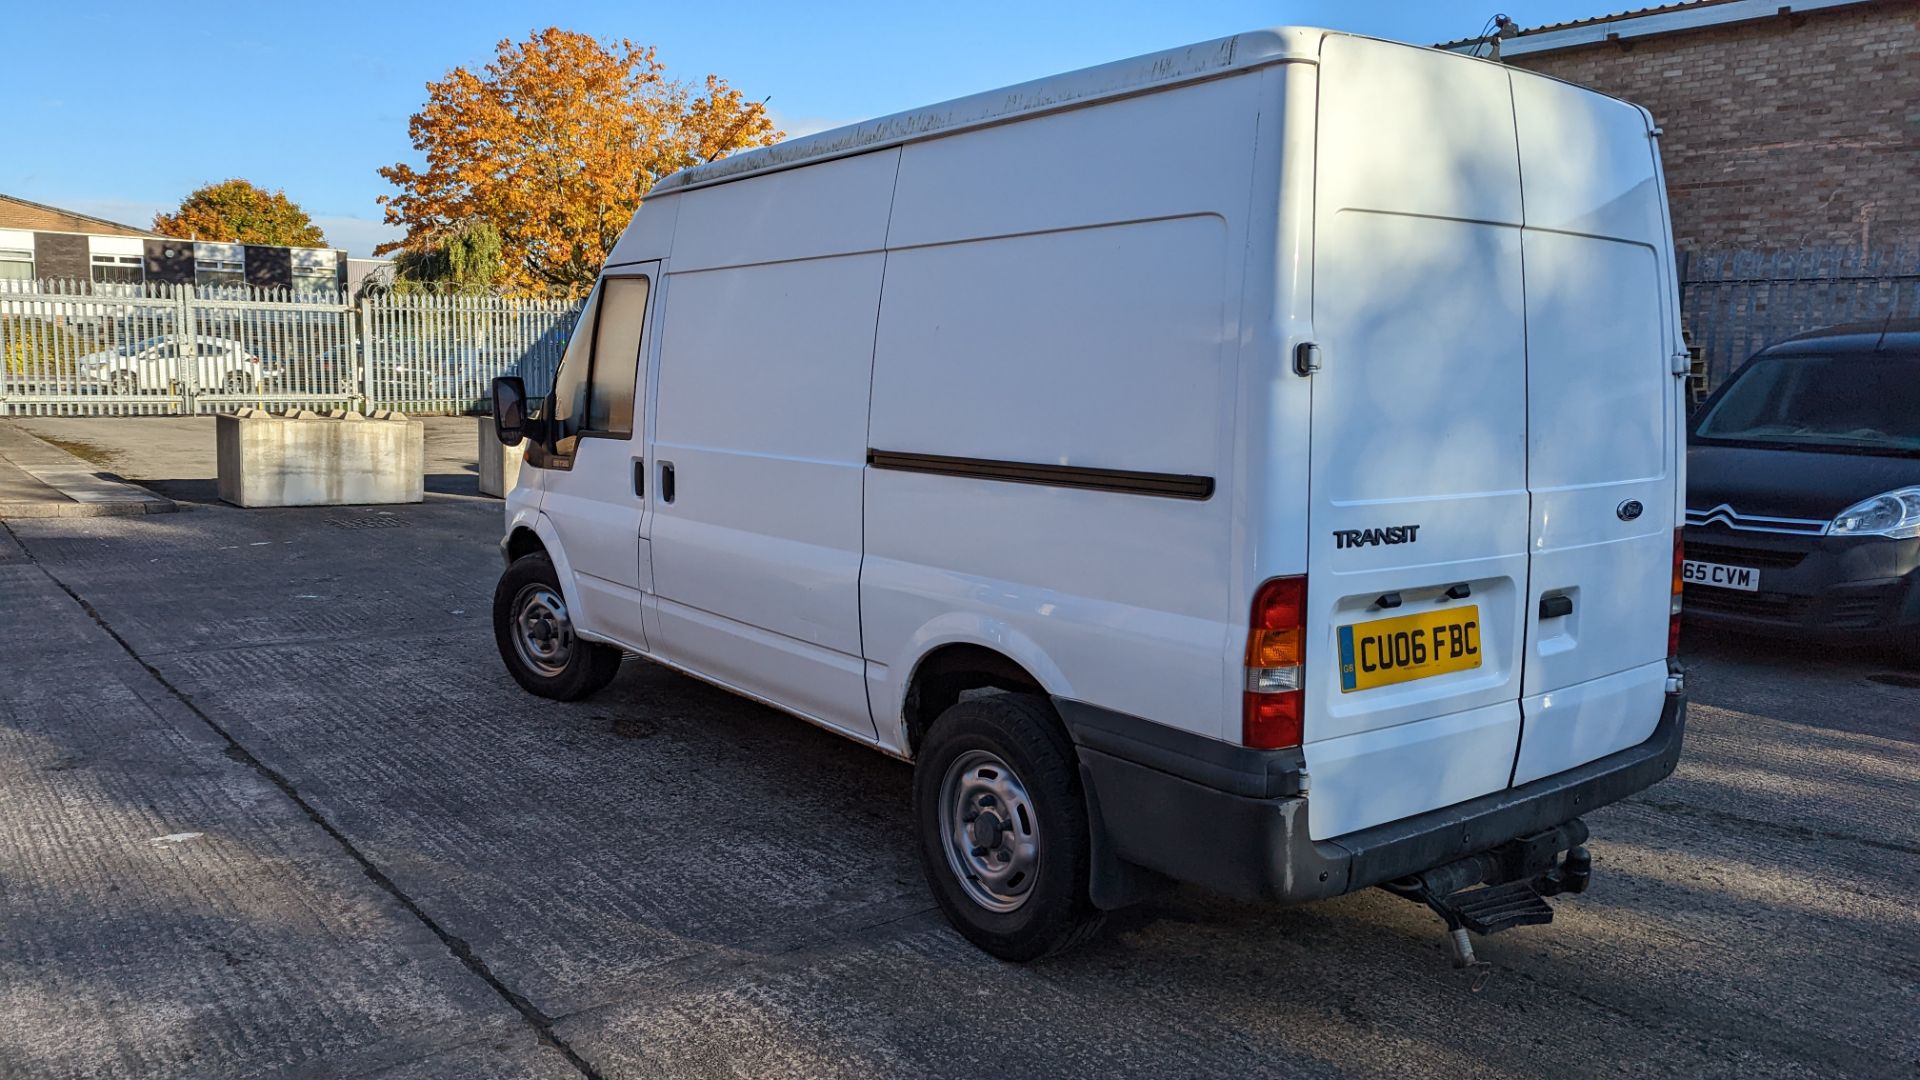 CU06 FBC Ford Transit panel van, 6 speed manual gearbox, 2402cc diesel engine. Colour: white. Fir - Image 15 of 44